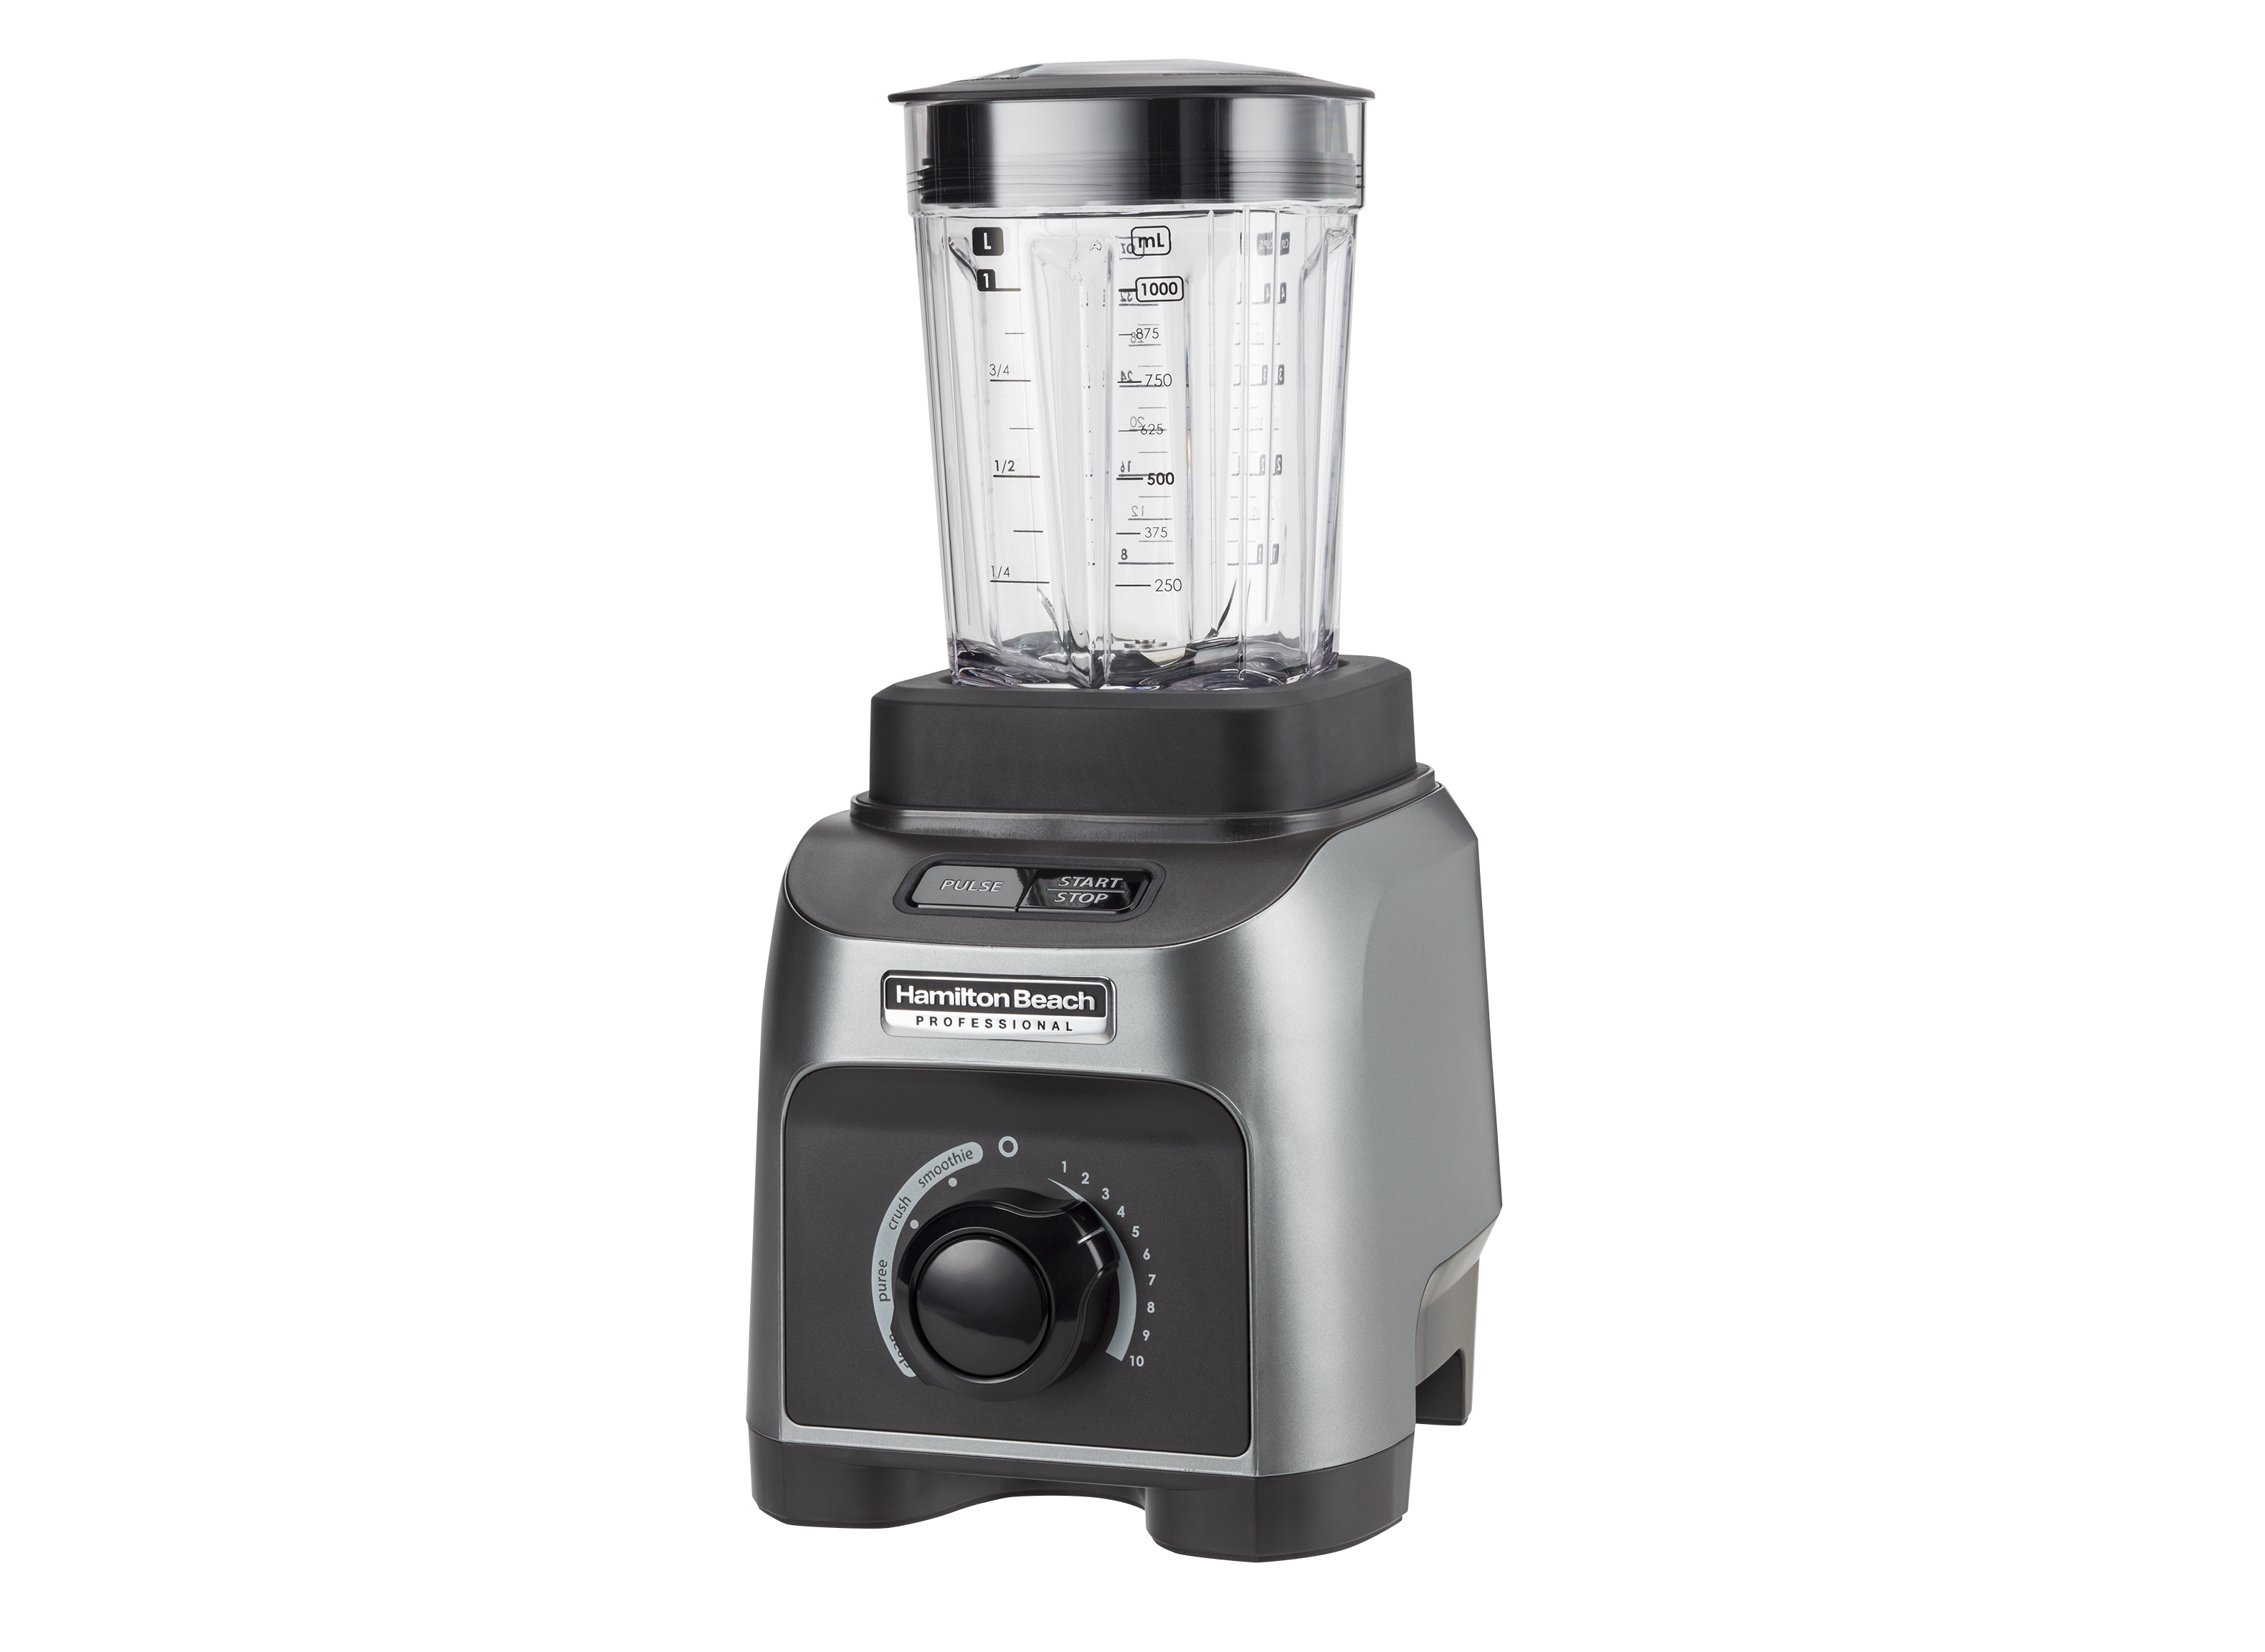 https://crdms.images.consumerreports.org/prod/products/cr/models/387258-blenders-hamiltonbeach-professionalquietpower58870.png